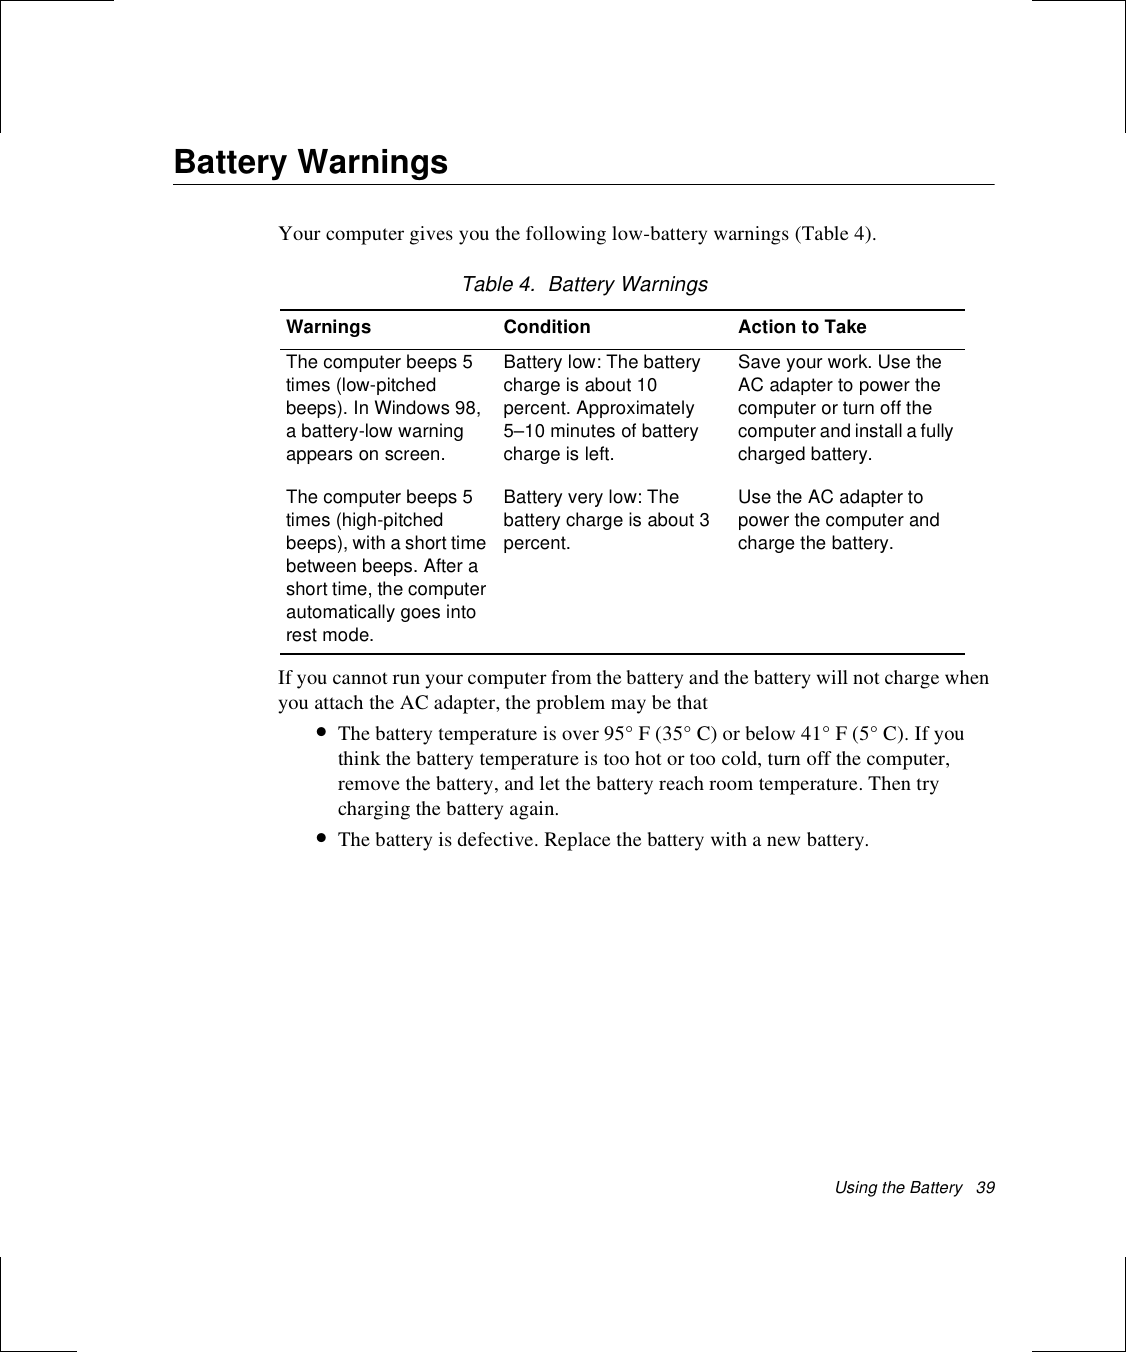 Using the Battery   39Battery WarningsYour computer gives you the following low-battery warnings (Table 4).Table 4.  Battery WarningsIf you cannot run your computer from the battery and the battery will not charge when you attach the AC adapter, the problem may be that•The battery temperature is over 95° F (35° C) or below 41° F (5° C). If you think the battery temperature is too hot or too cold, turn off the computer, remove the battery, and let the battery reach room temperature. Then try charging the battery again. •The battery is defective. Replace the battery with a new battery.Warnings Condition Action to TakeThe computer beeps 5 times (low-pitched beeps). In Windows 98, a battery-low warning appears on screen.Battery low: The battery charge is about 10 percent. Approximately 5–10 minutes of battery charge is left.Save your work. Use the AC adapter to power the computer or turn off the computer and install a fully charged battery.The computer beeps 5 times (high-pitched beeps), with a short time between beeps. After a short time, the computer automatically goes into rest mode.Battery very low: The battery charge is about 3 percent. Use the AC adapter to power the computer and charge the battery.